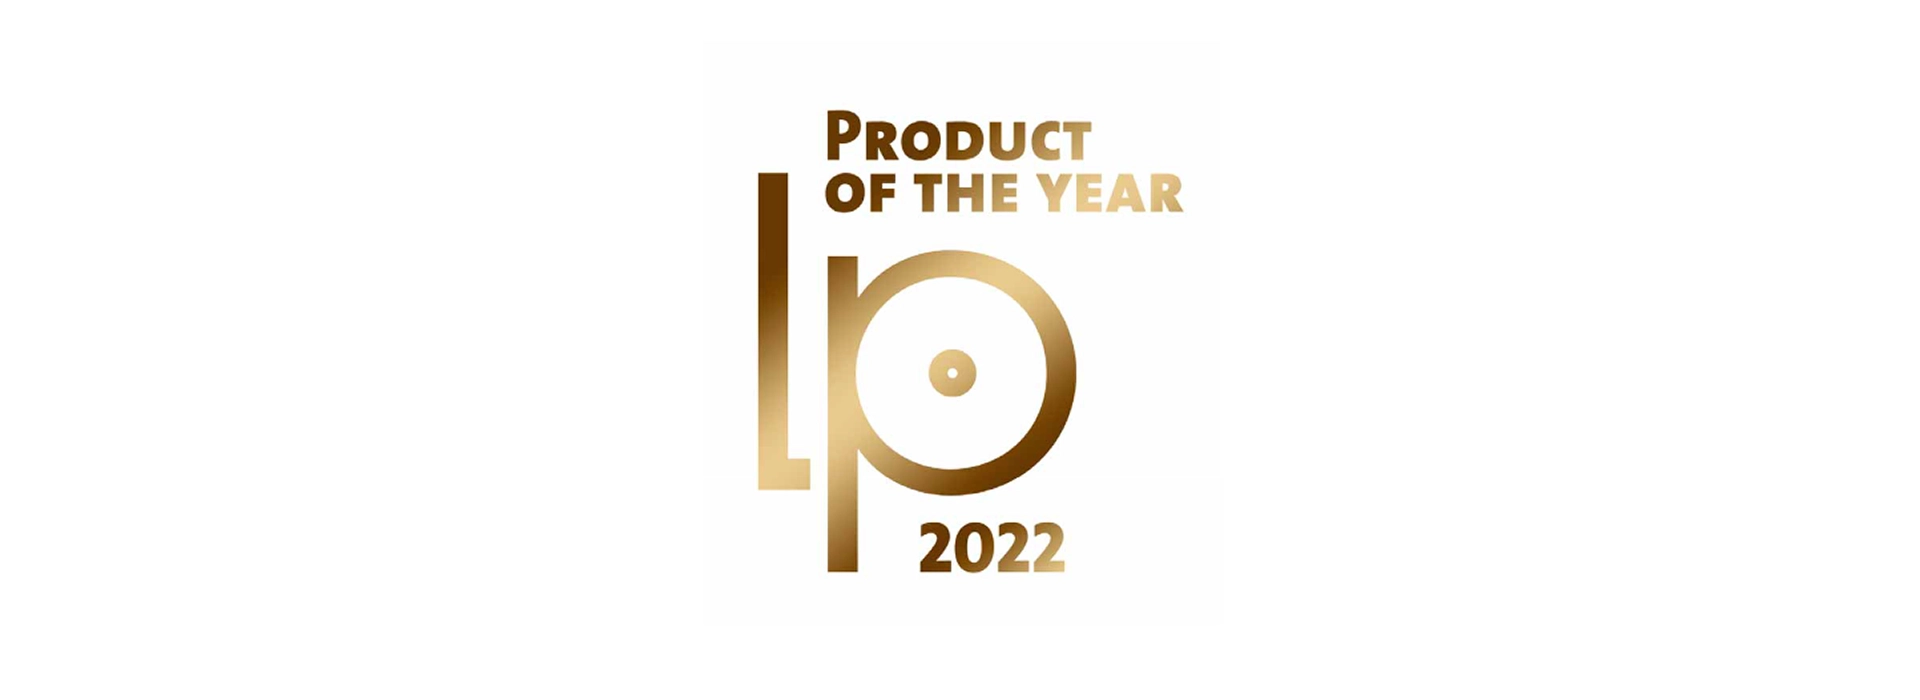 LP Product of the Year 2022